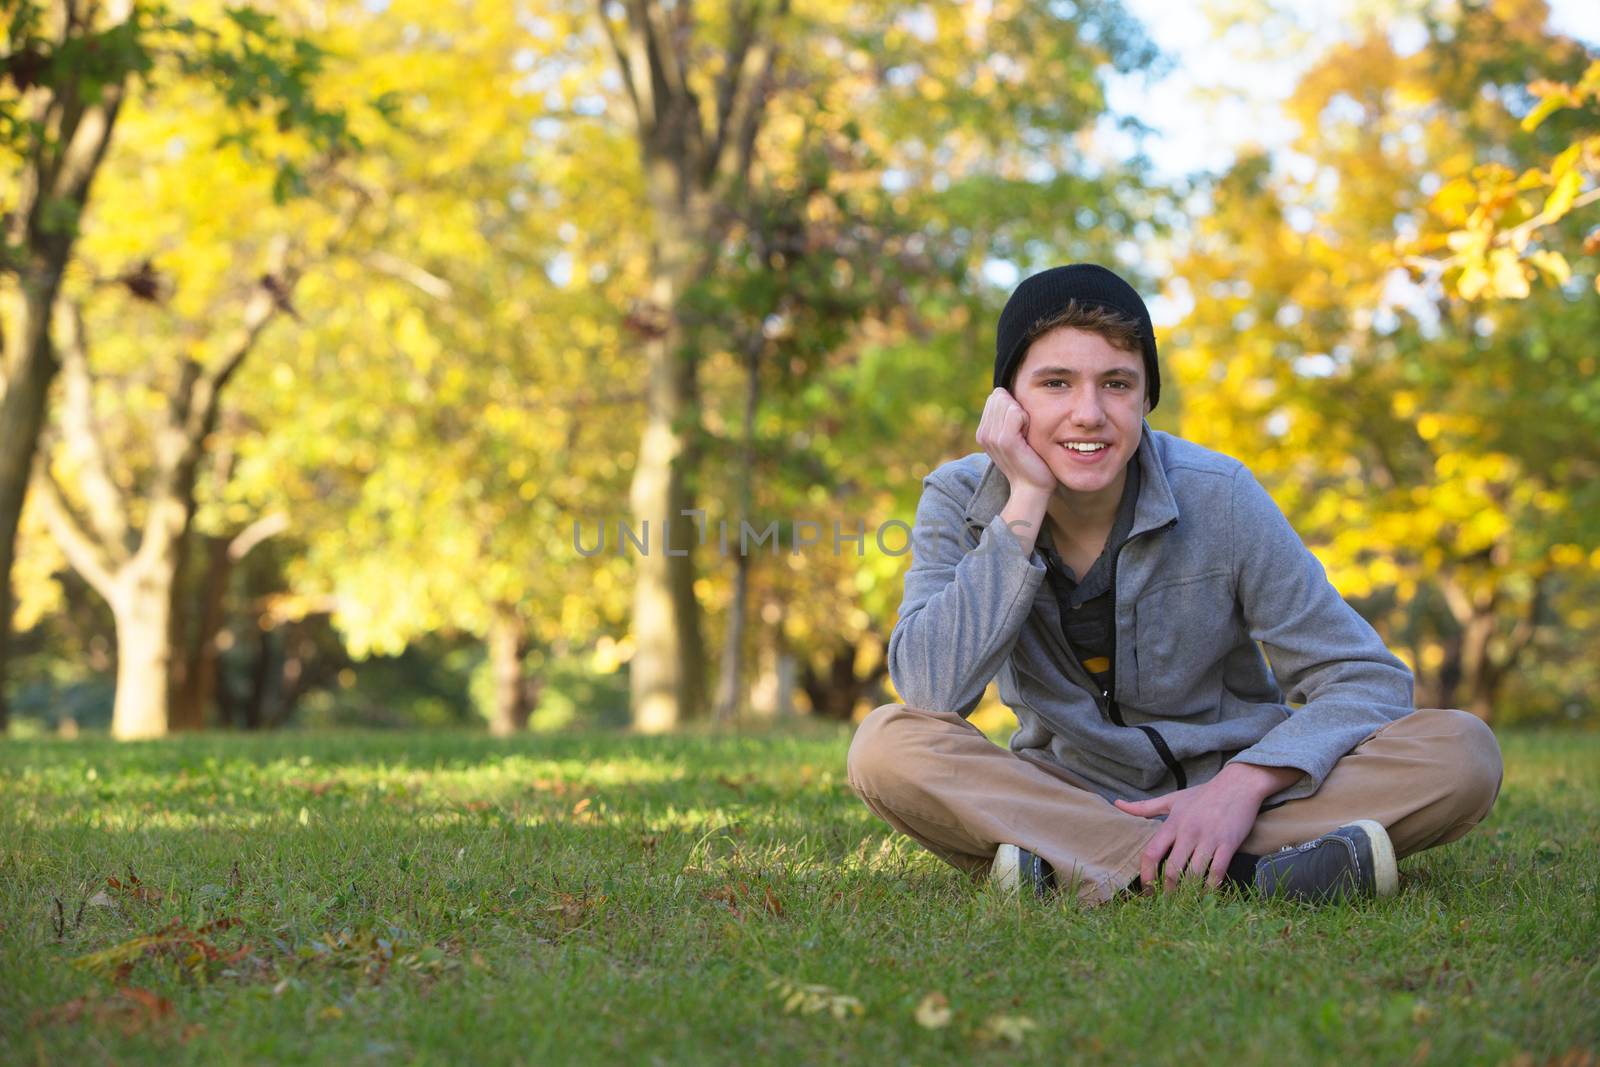 Cute Teen Outdoors Smiling by Creatista